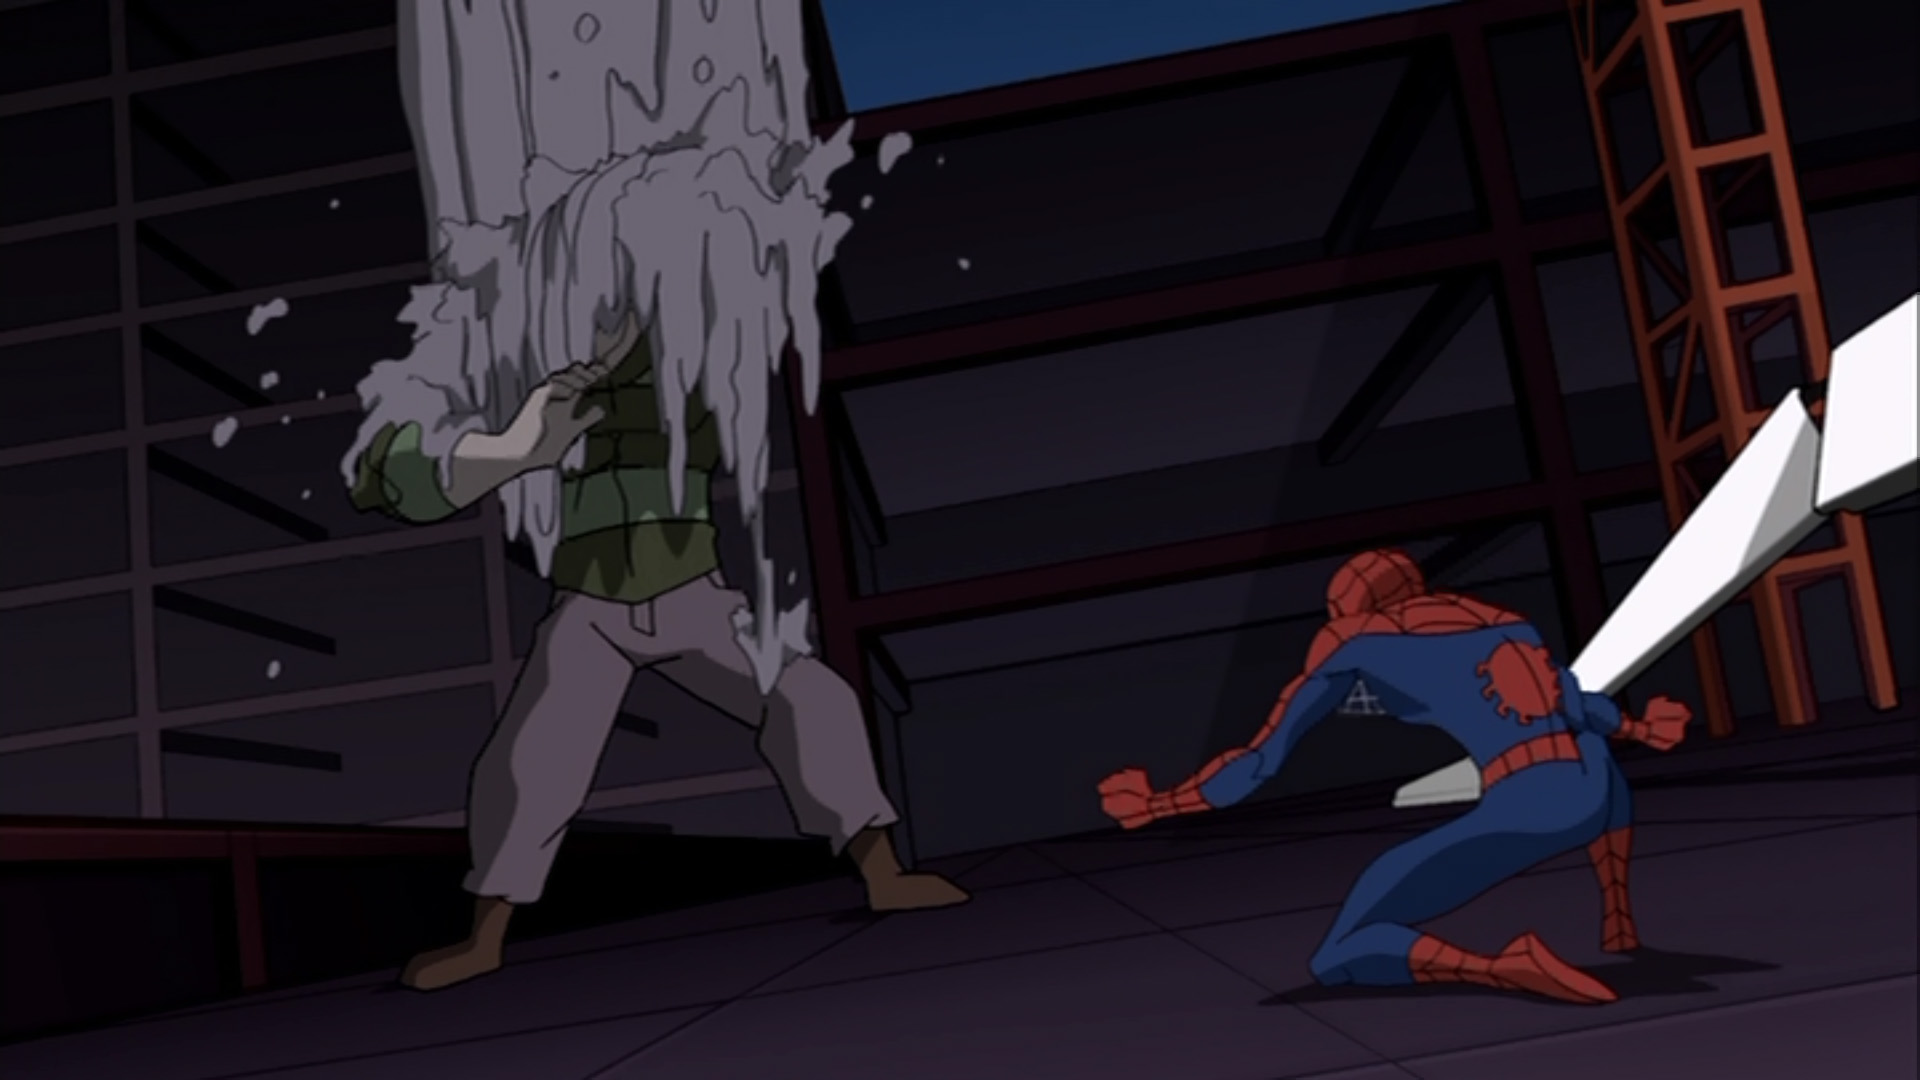 Spider-Man acts somewhat out of character when he defeats villains in a way...